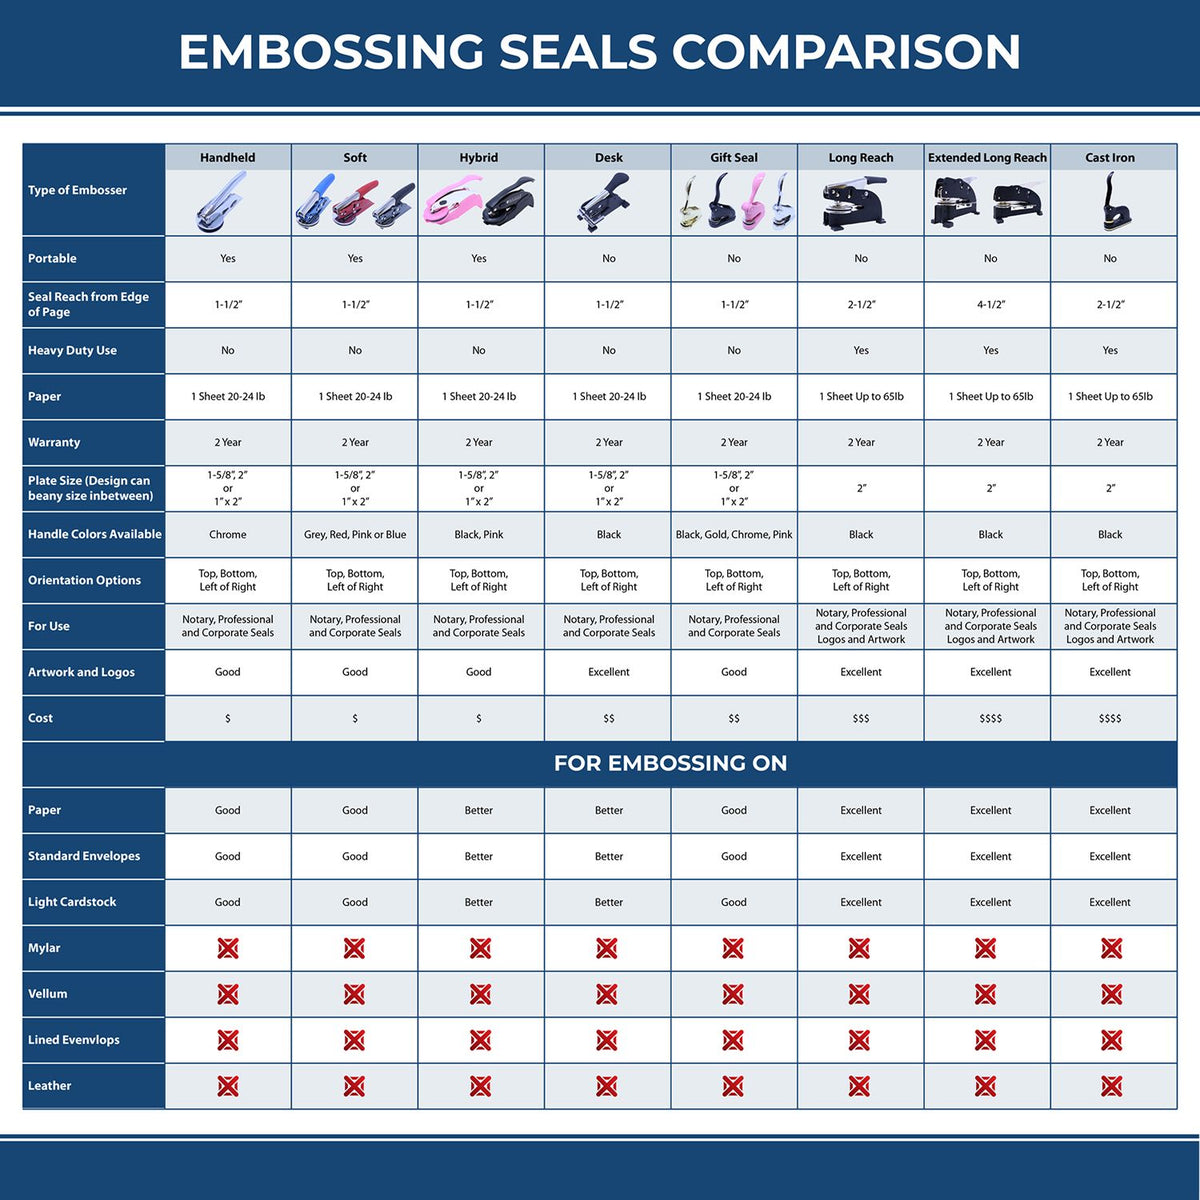 A comparison chart for the different types of mount models available for the Long Reach Arizona Land Surveyor Seal.